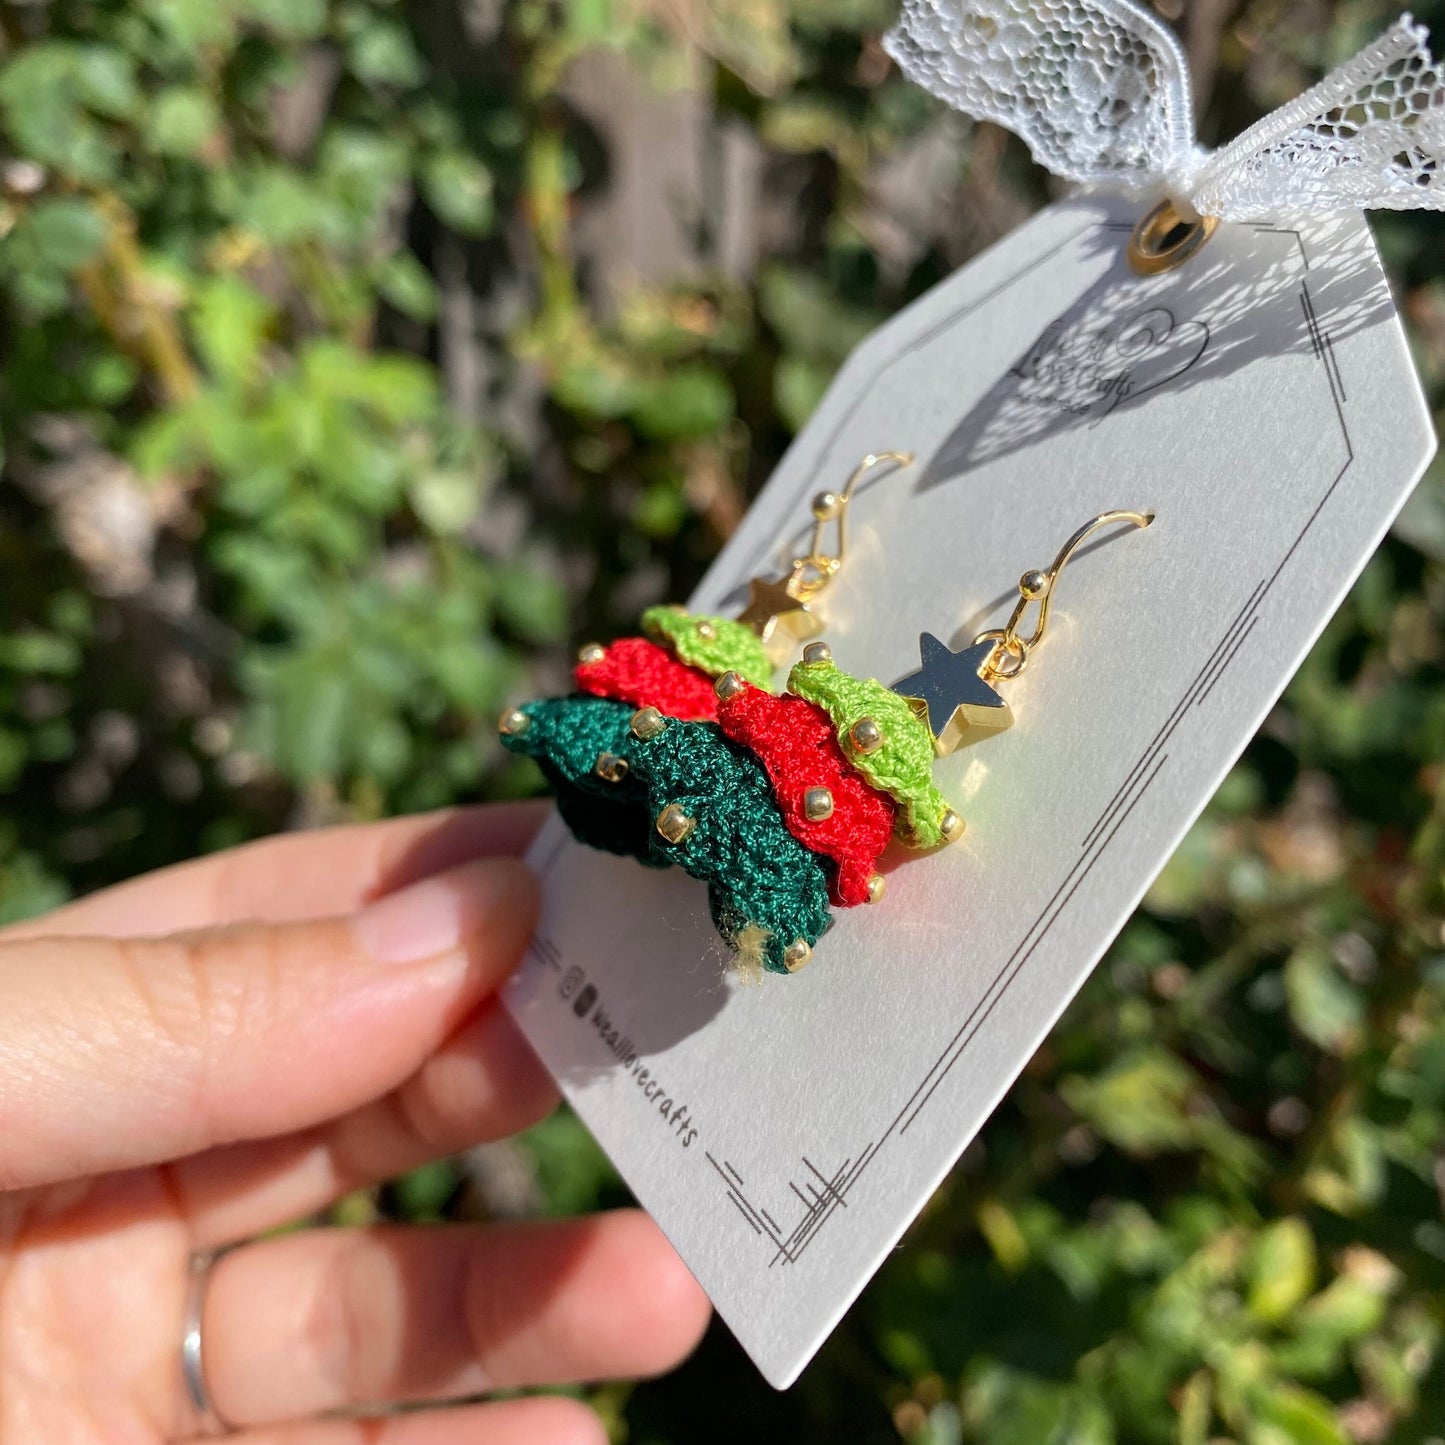 Load image into Gallery viewer, Christmas 3d layered tree crochet dangle earrings with beads/Red and Green/Microcrochet/gift for her/Knitting handmade jewelry/Ship from US
